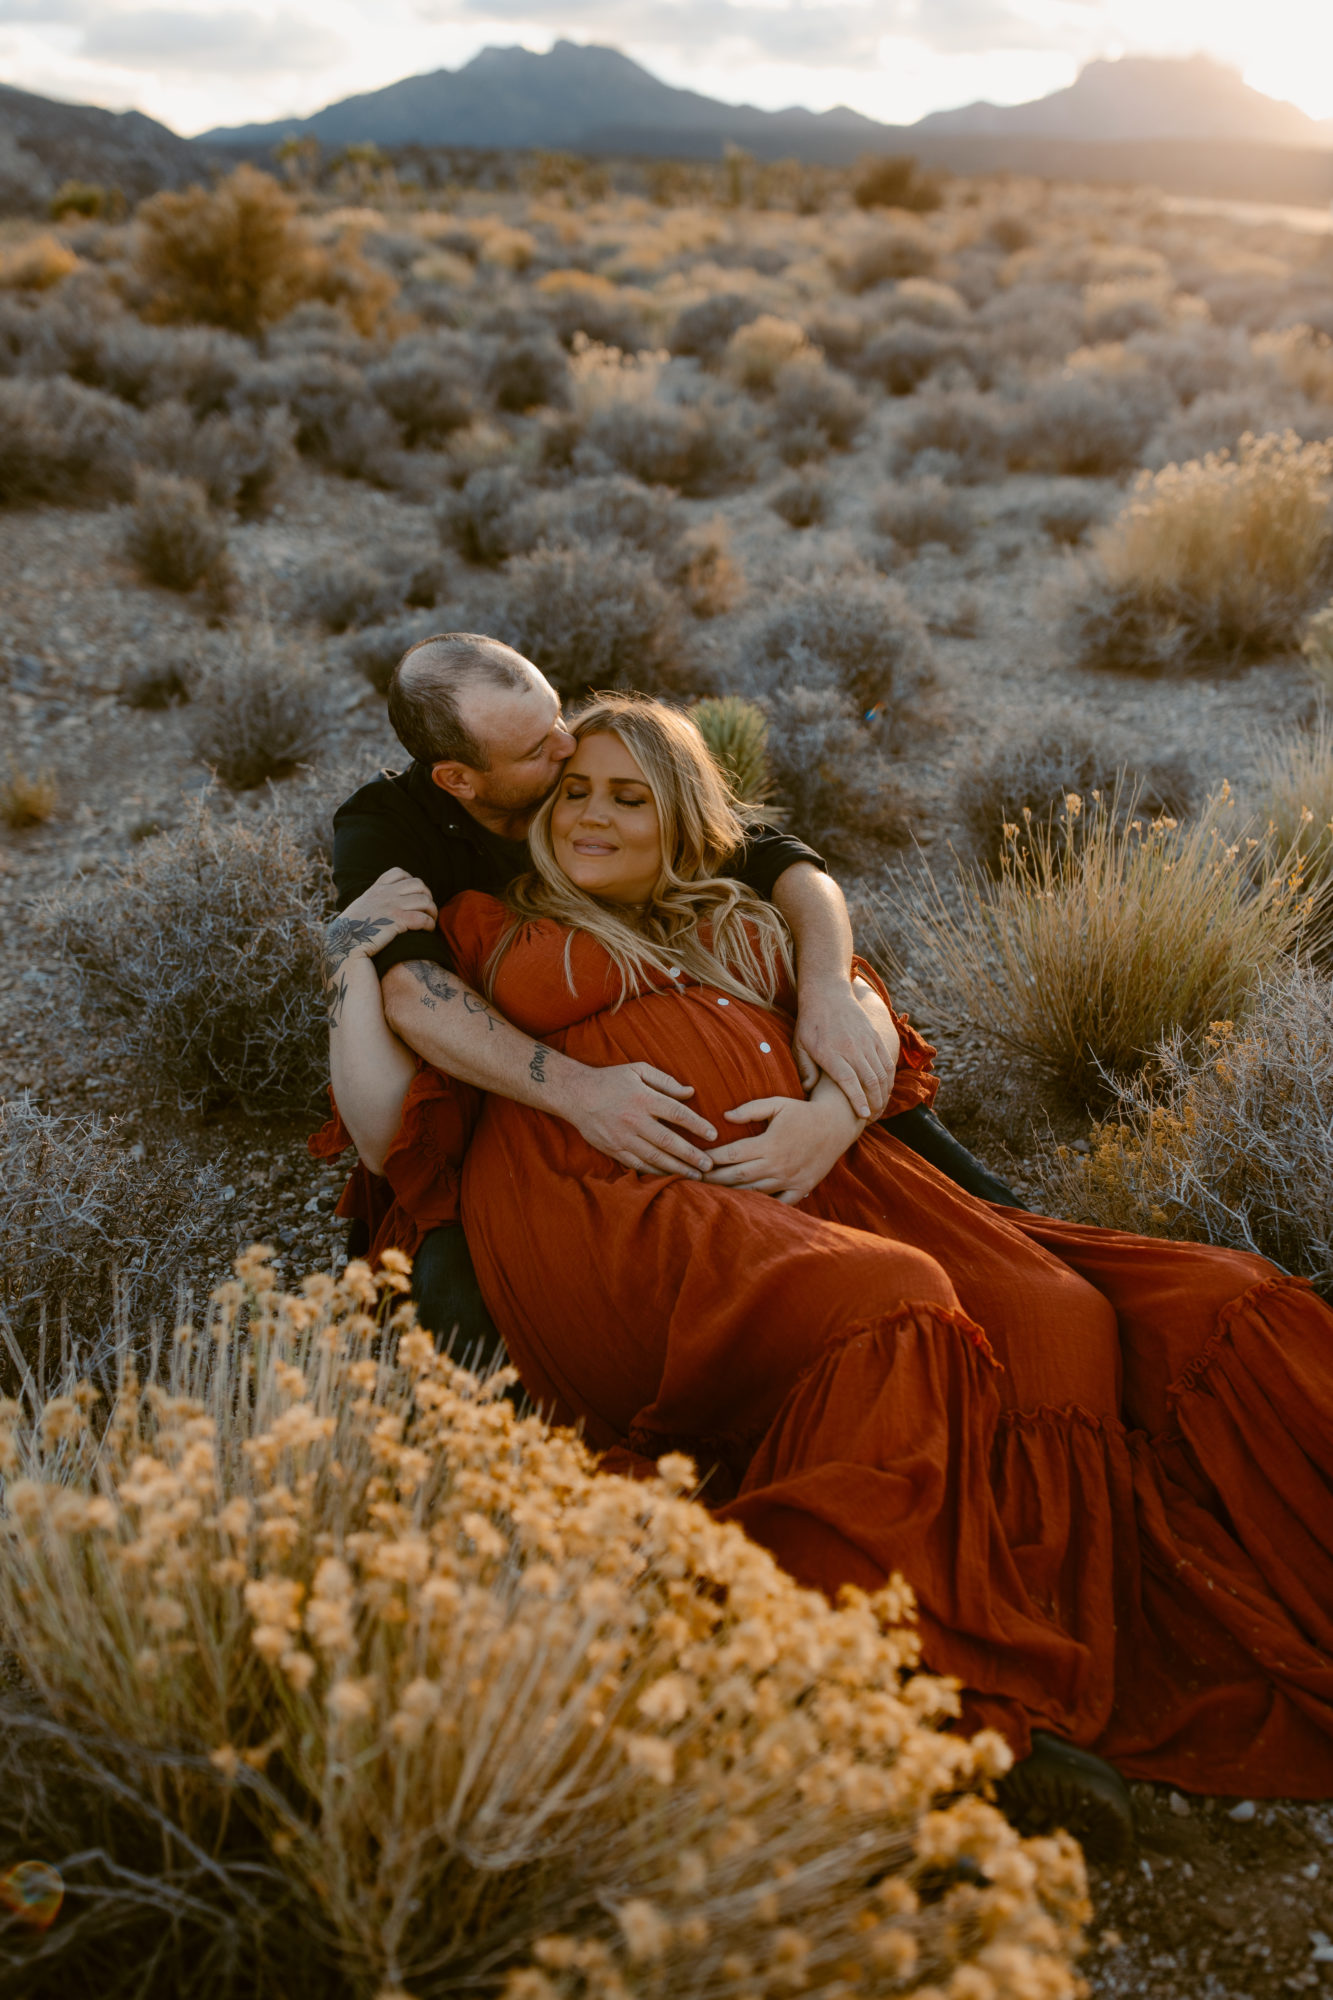 Couple during desert photoshoot laying down and cuddling